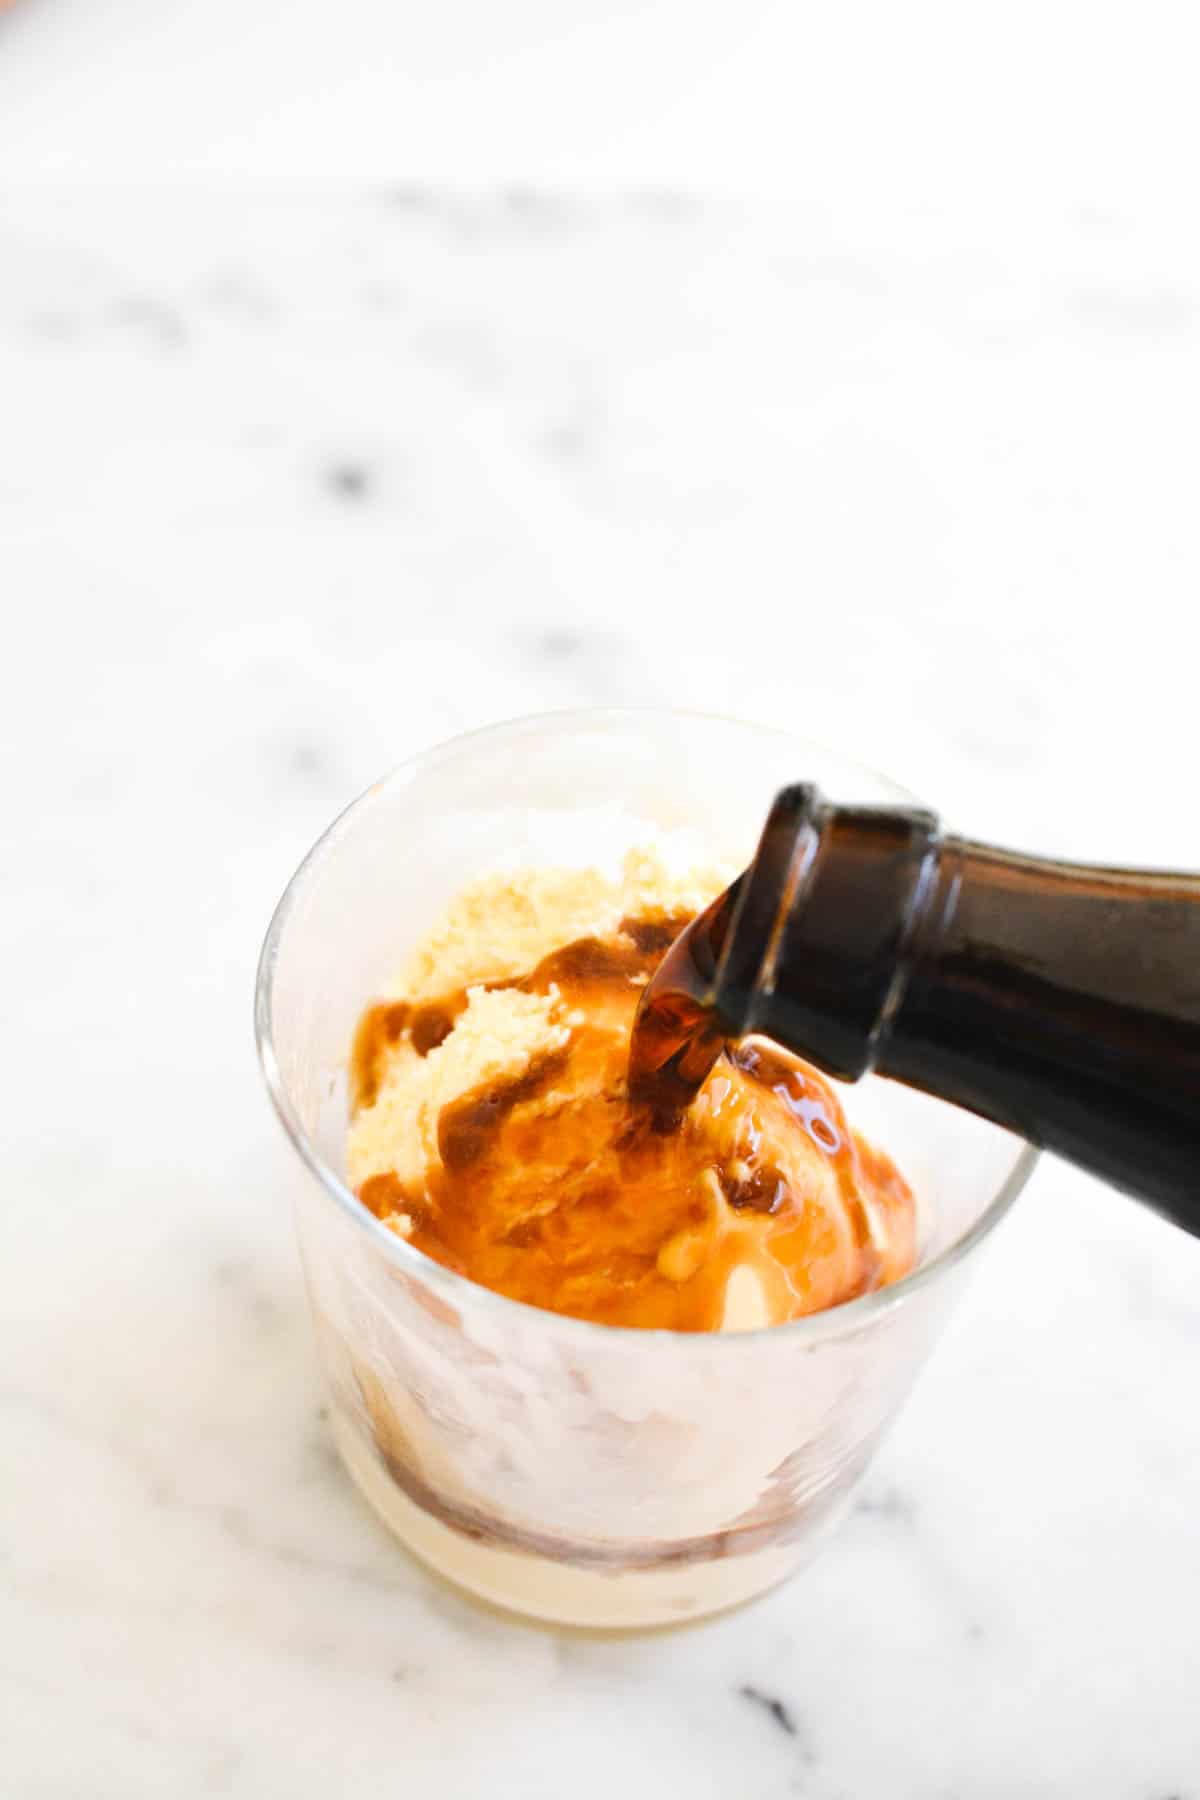 Beer being poured over ice cream in a short glass for an alcoholic float.